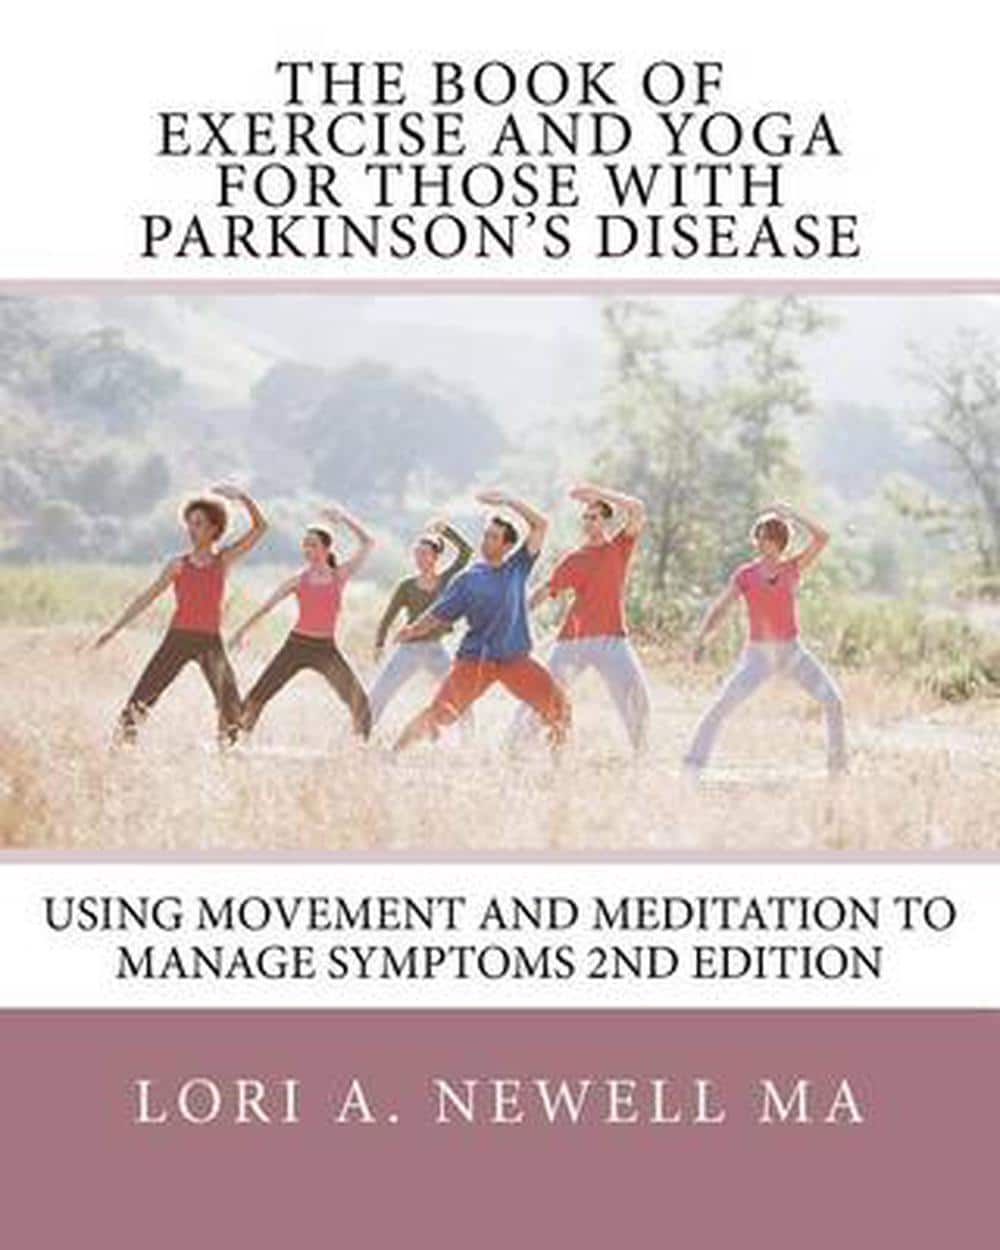 The Book of Exercise and Yoga for Those with Parkinson